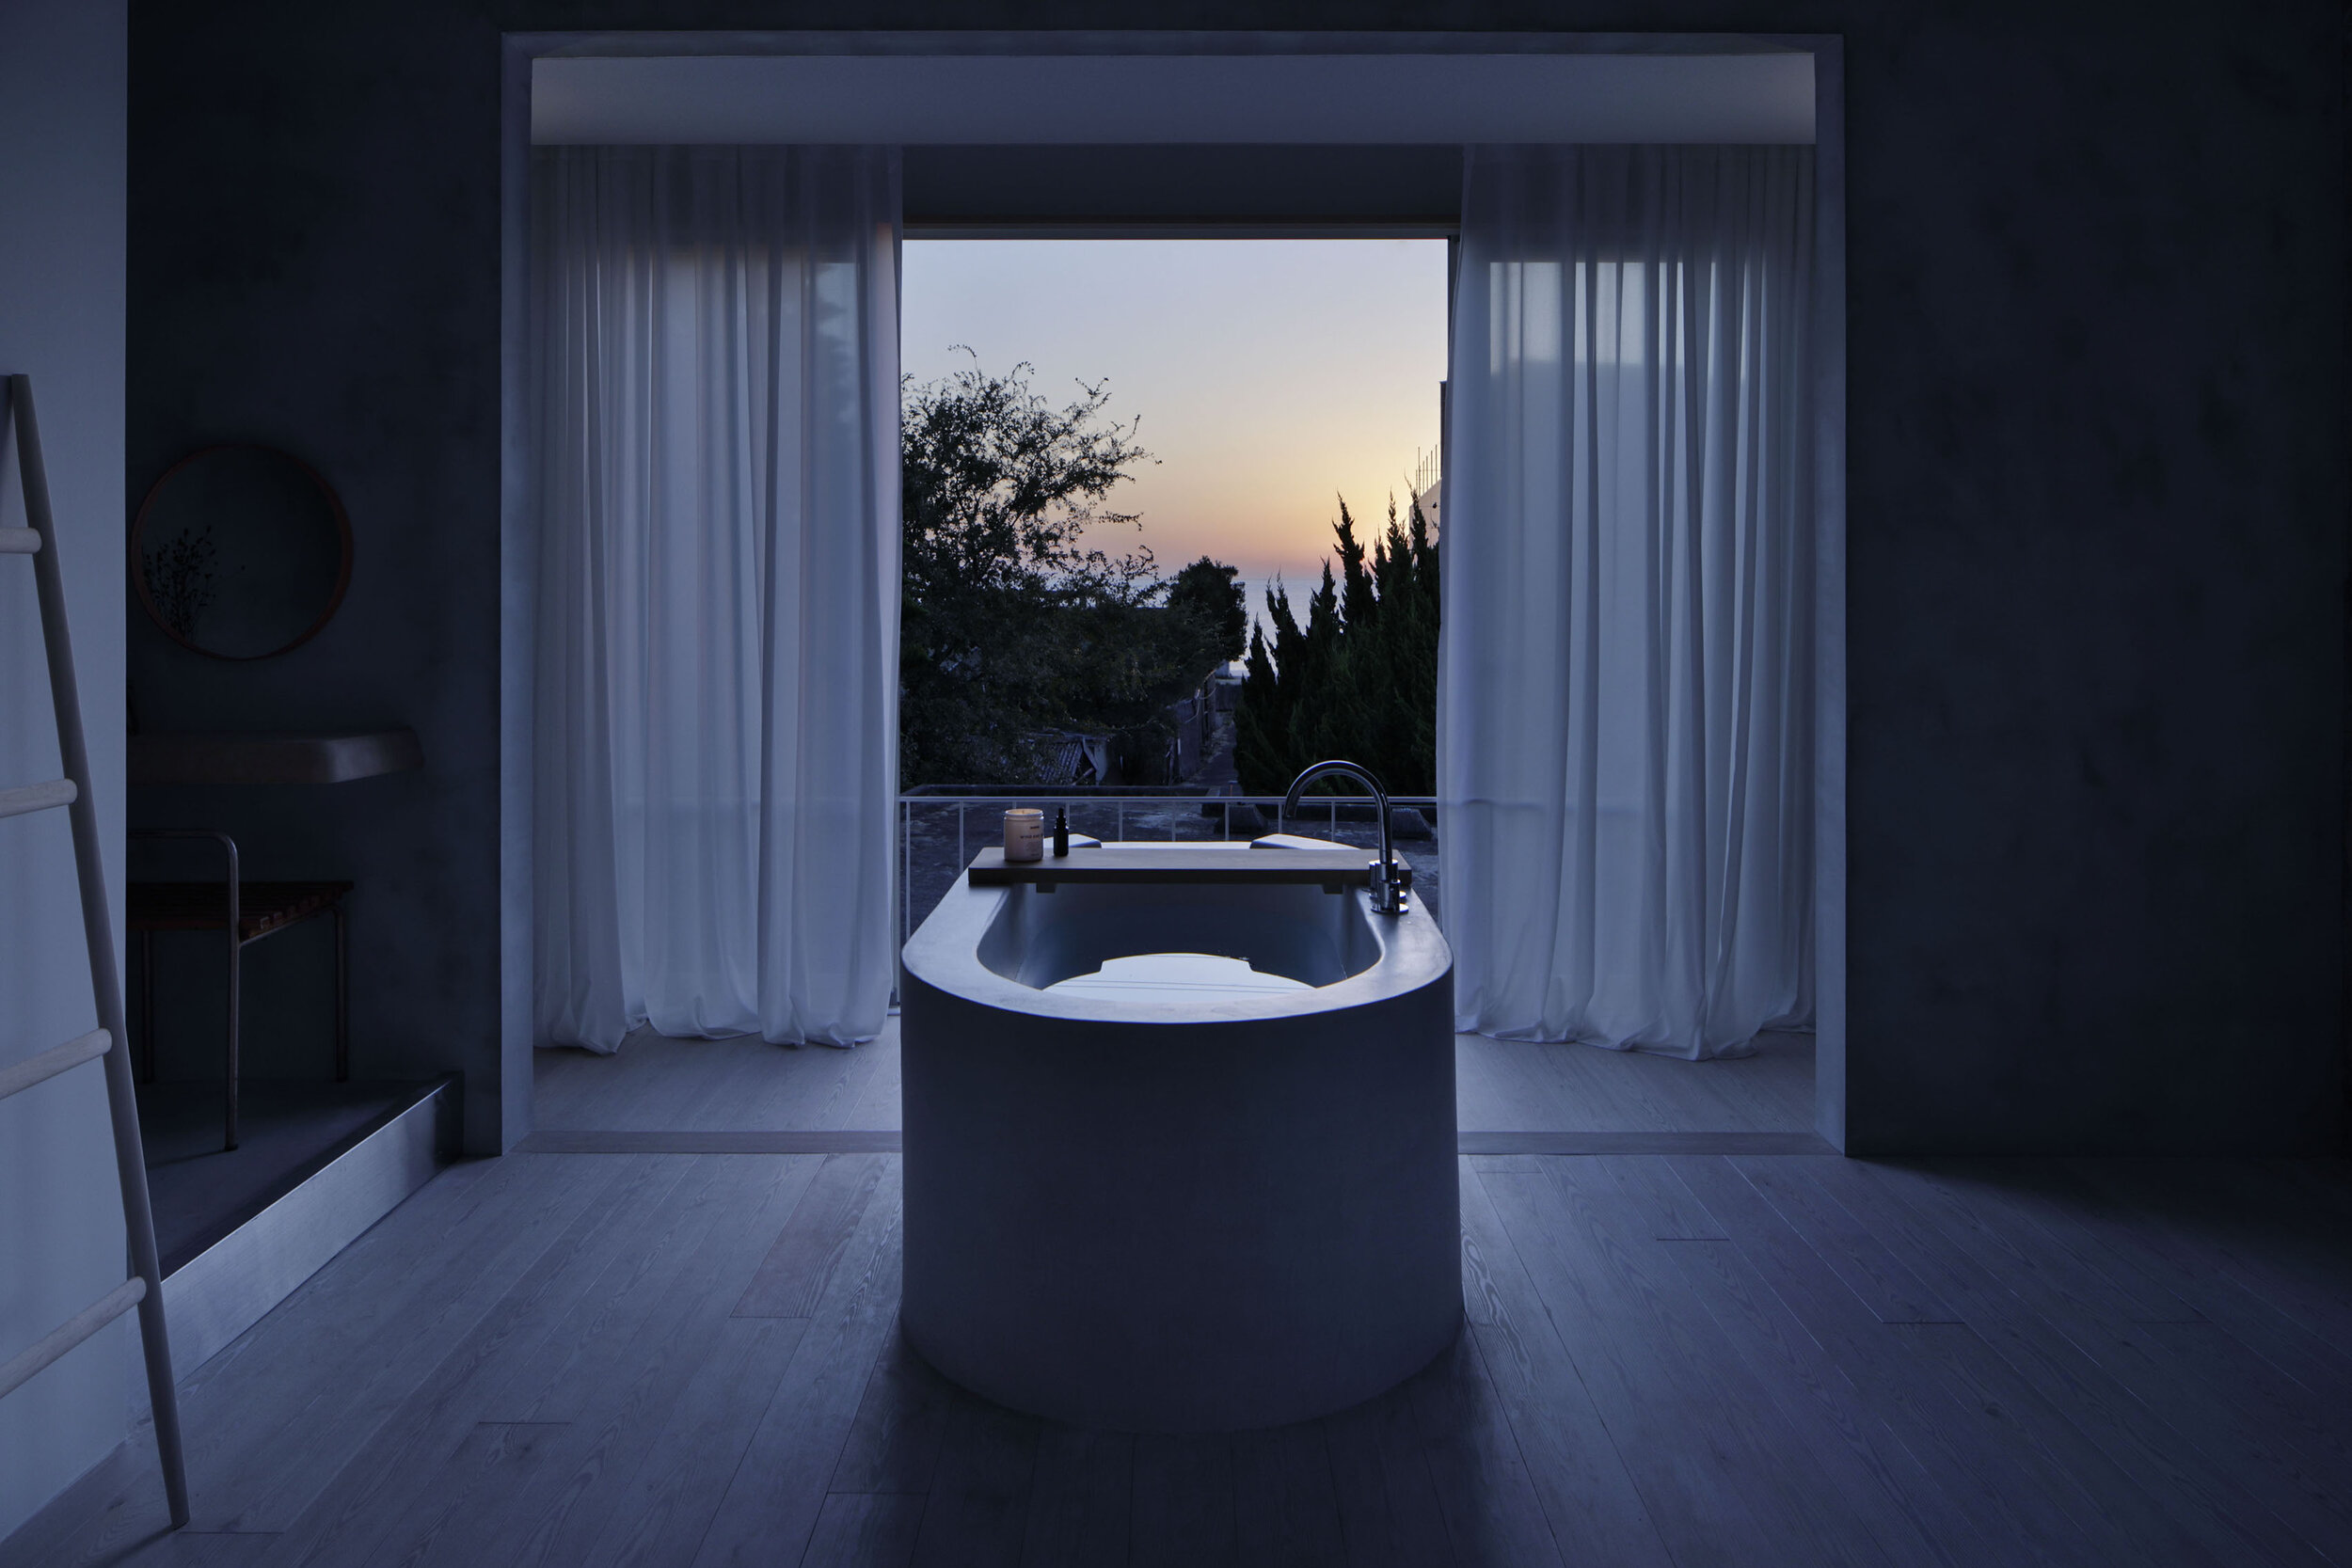  A Bathroom of ISLAND LIVING designed by Hiroyuki Ogura/DRAWERS. The guest can see the sunrise from the bathroom. 